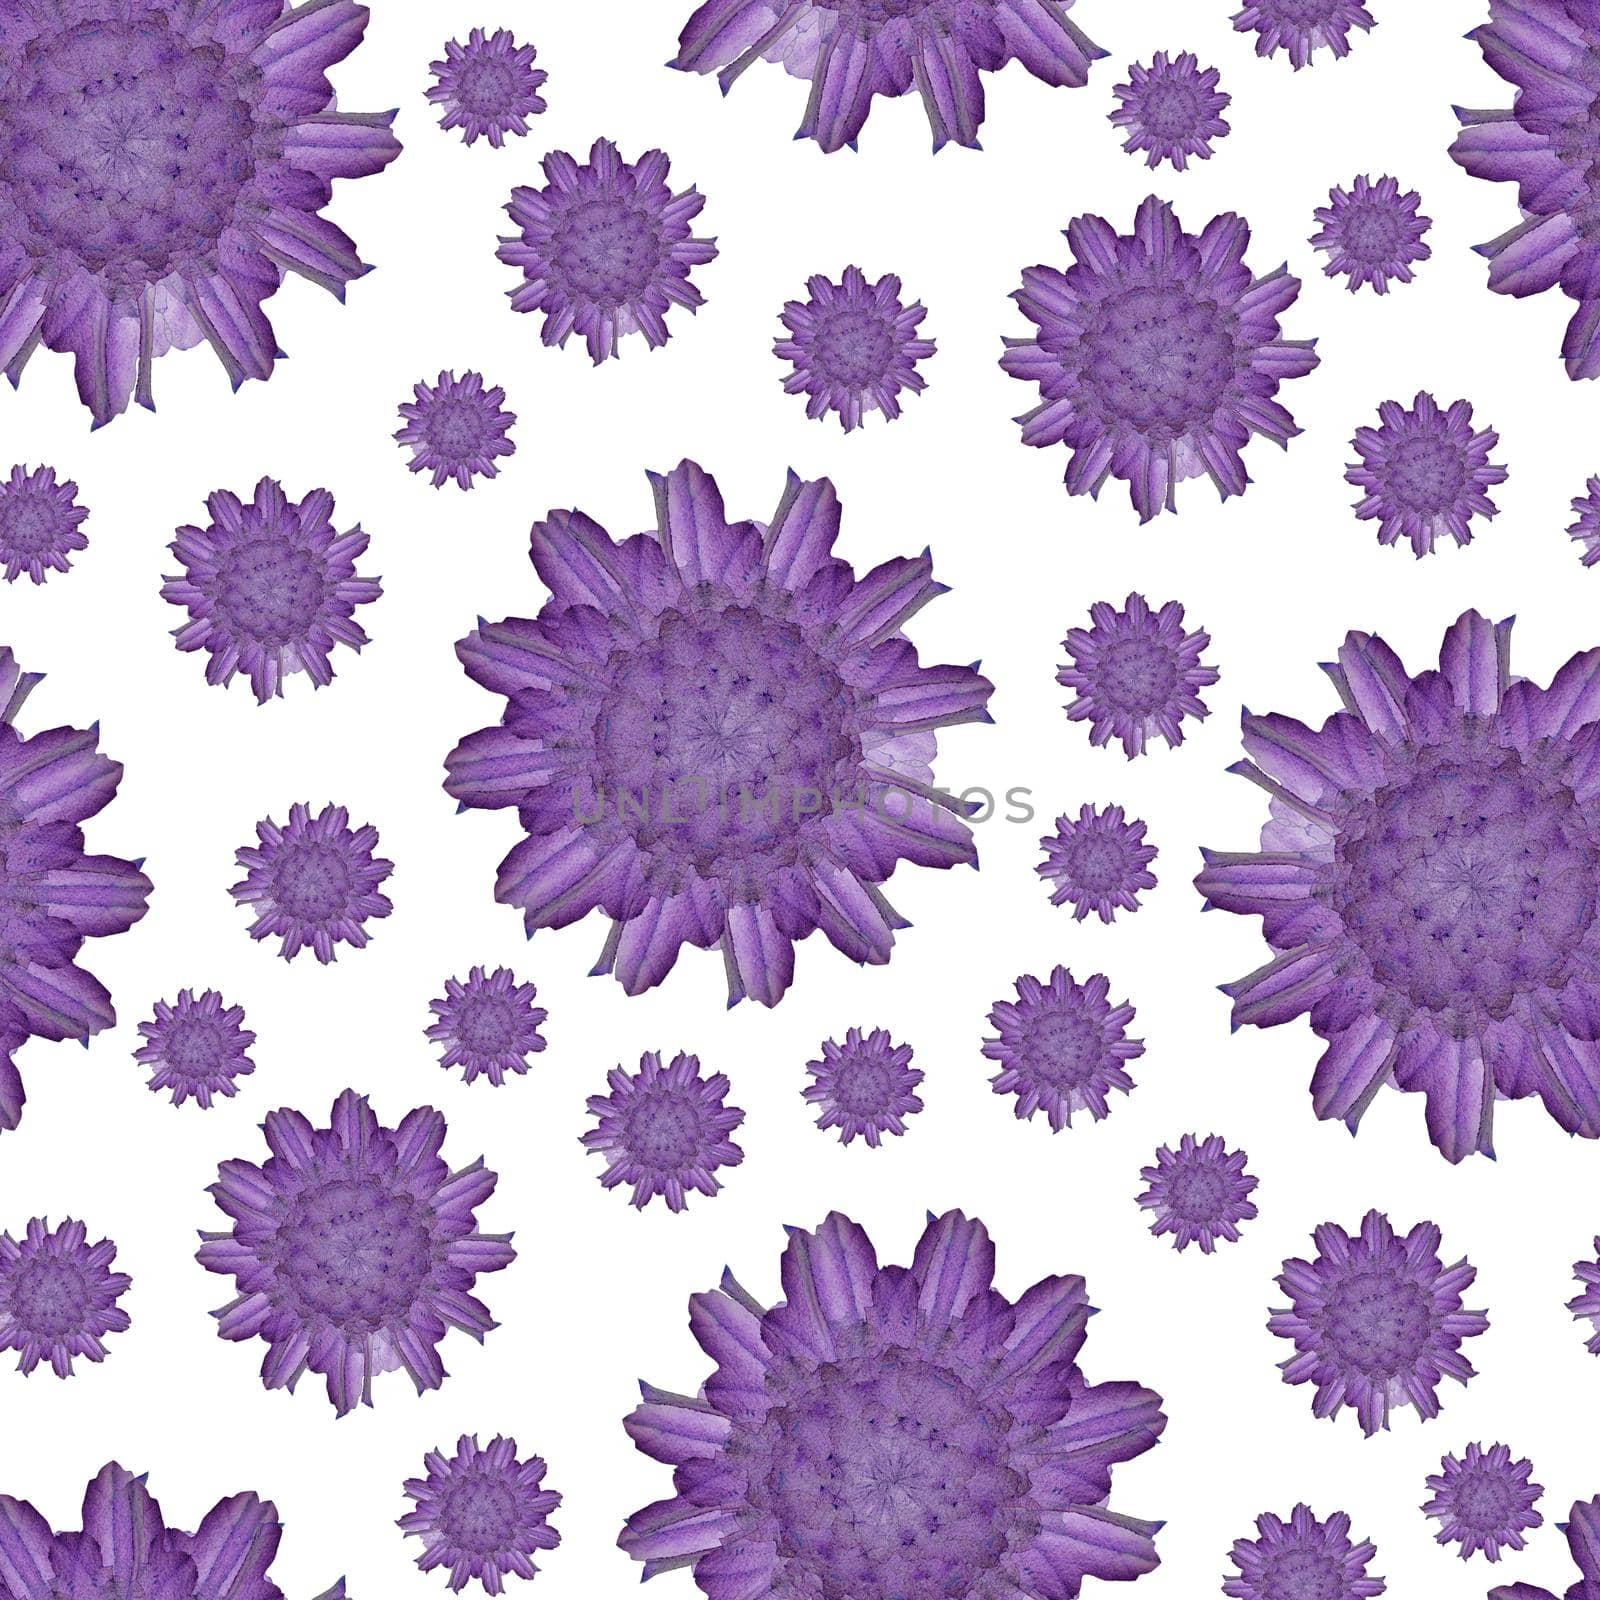 Floral Repeat Pattern. Violet Flower on White Background. Floral Abstract Background. Flower Seamless Pattern.